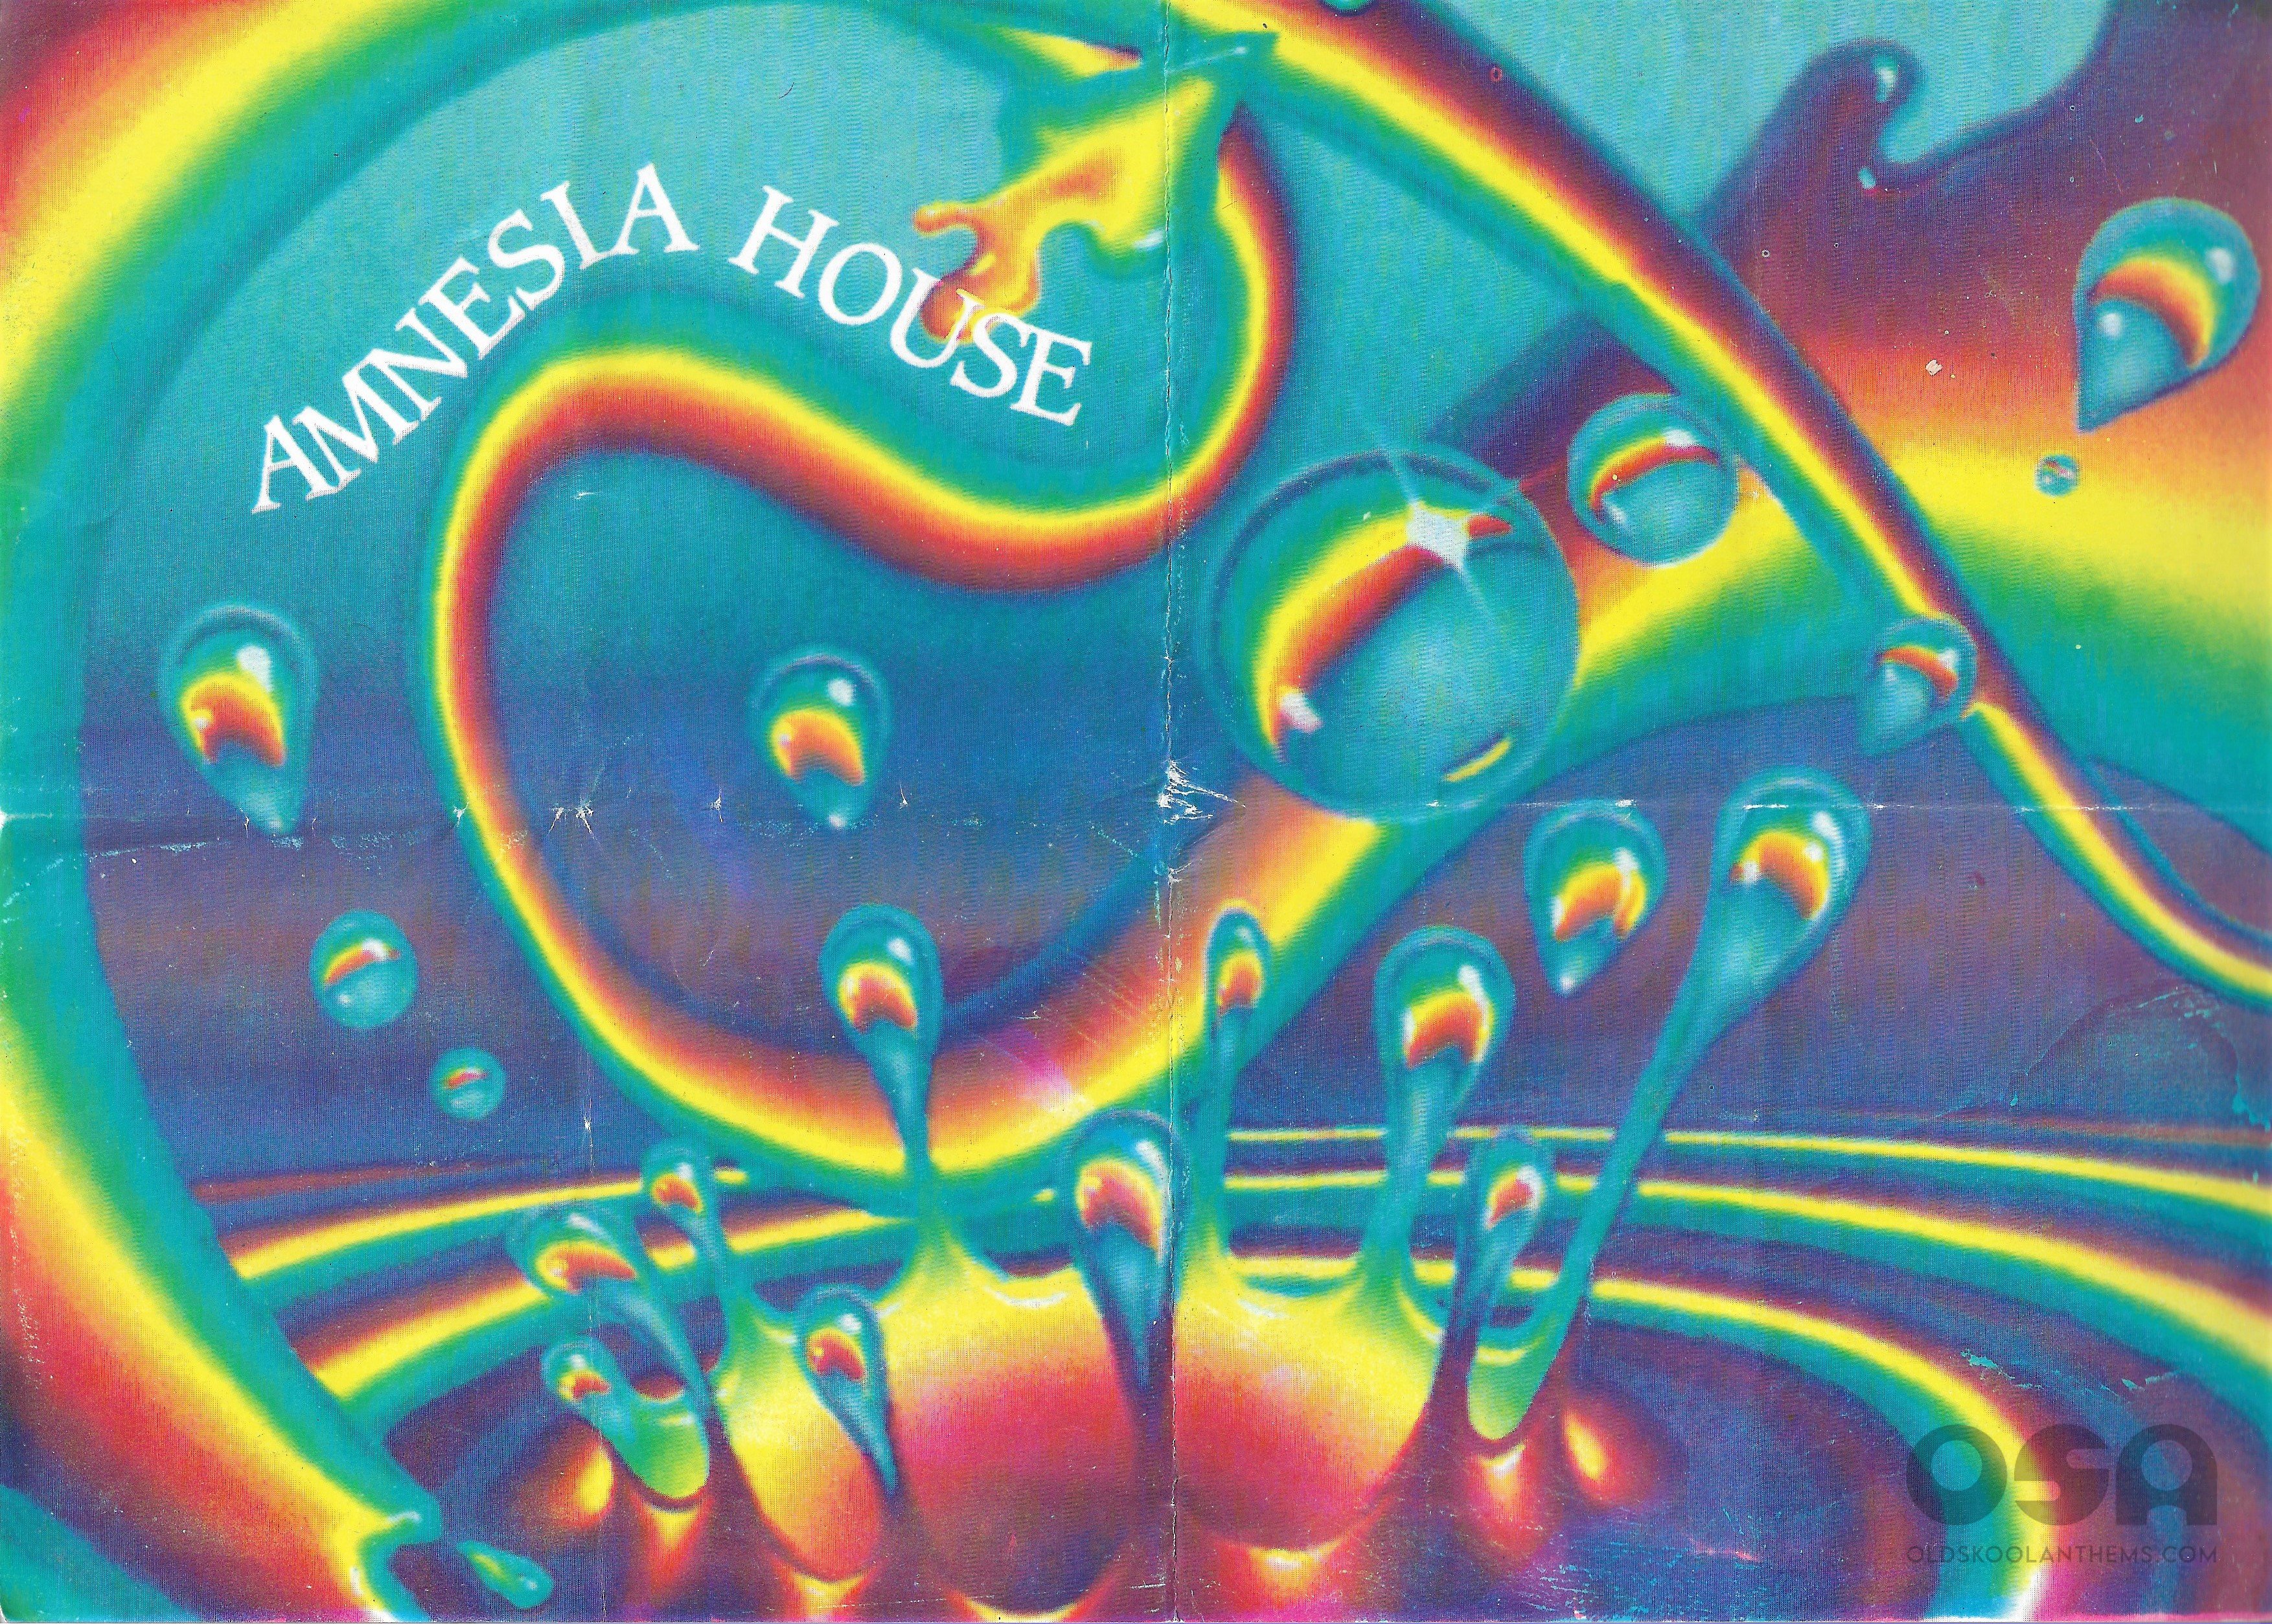 Amnesia House @ The Eclipse - Coventry - 17th April 1992 - A .jpg